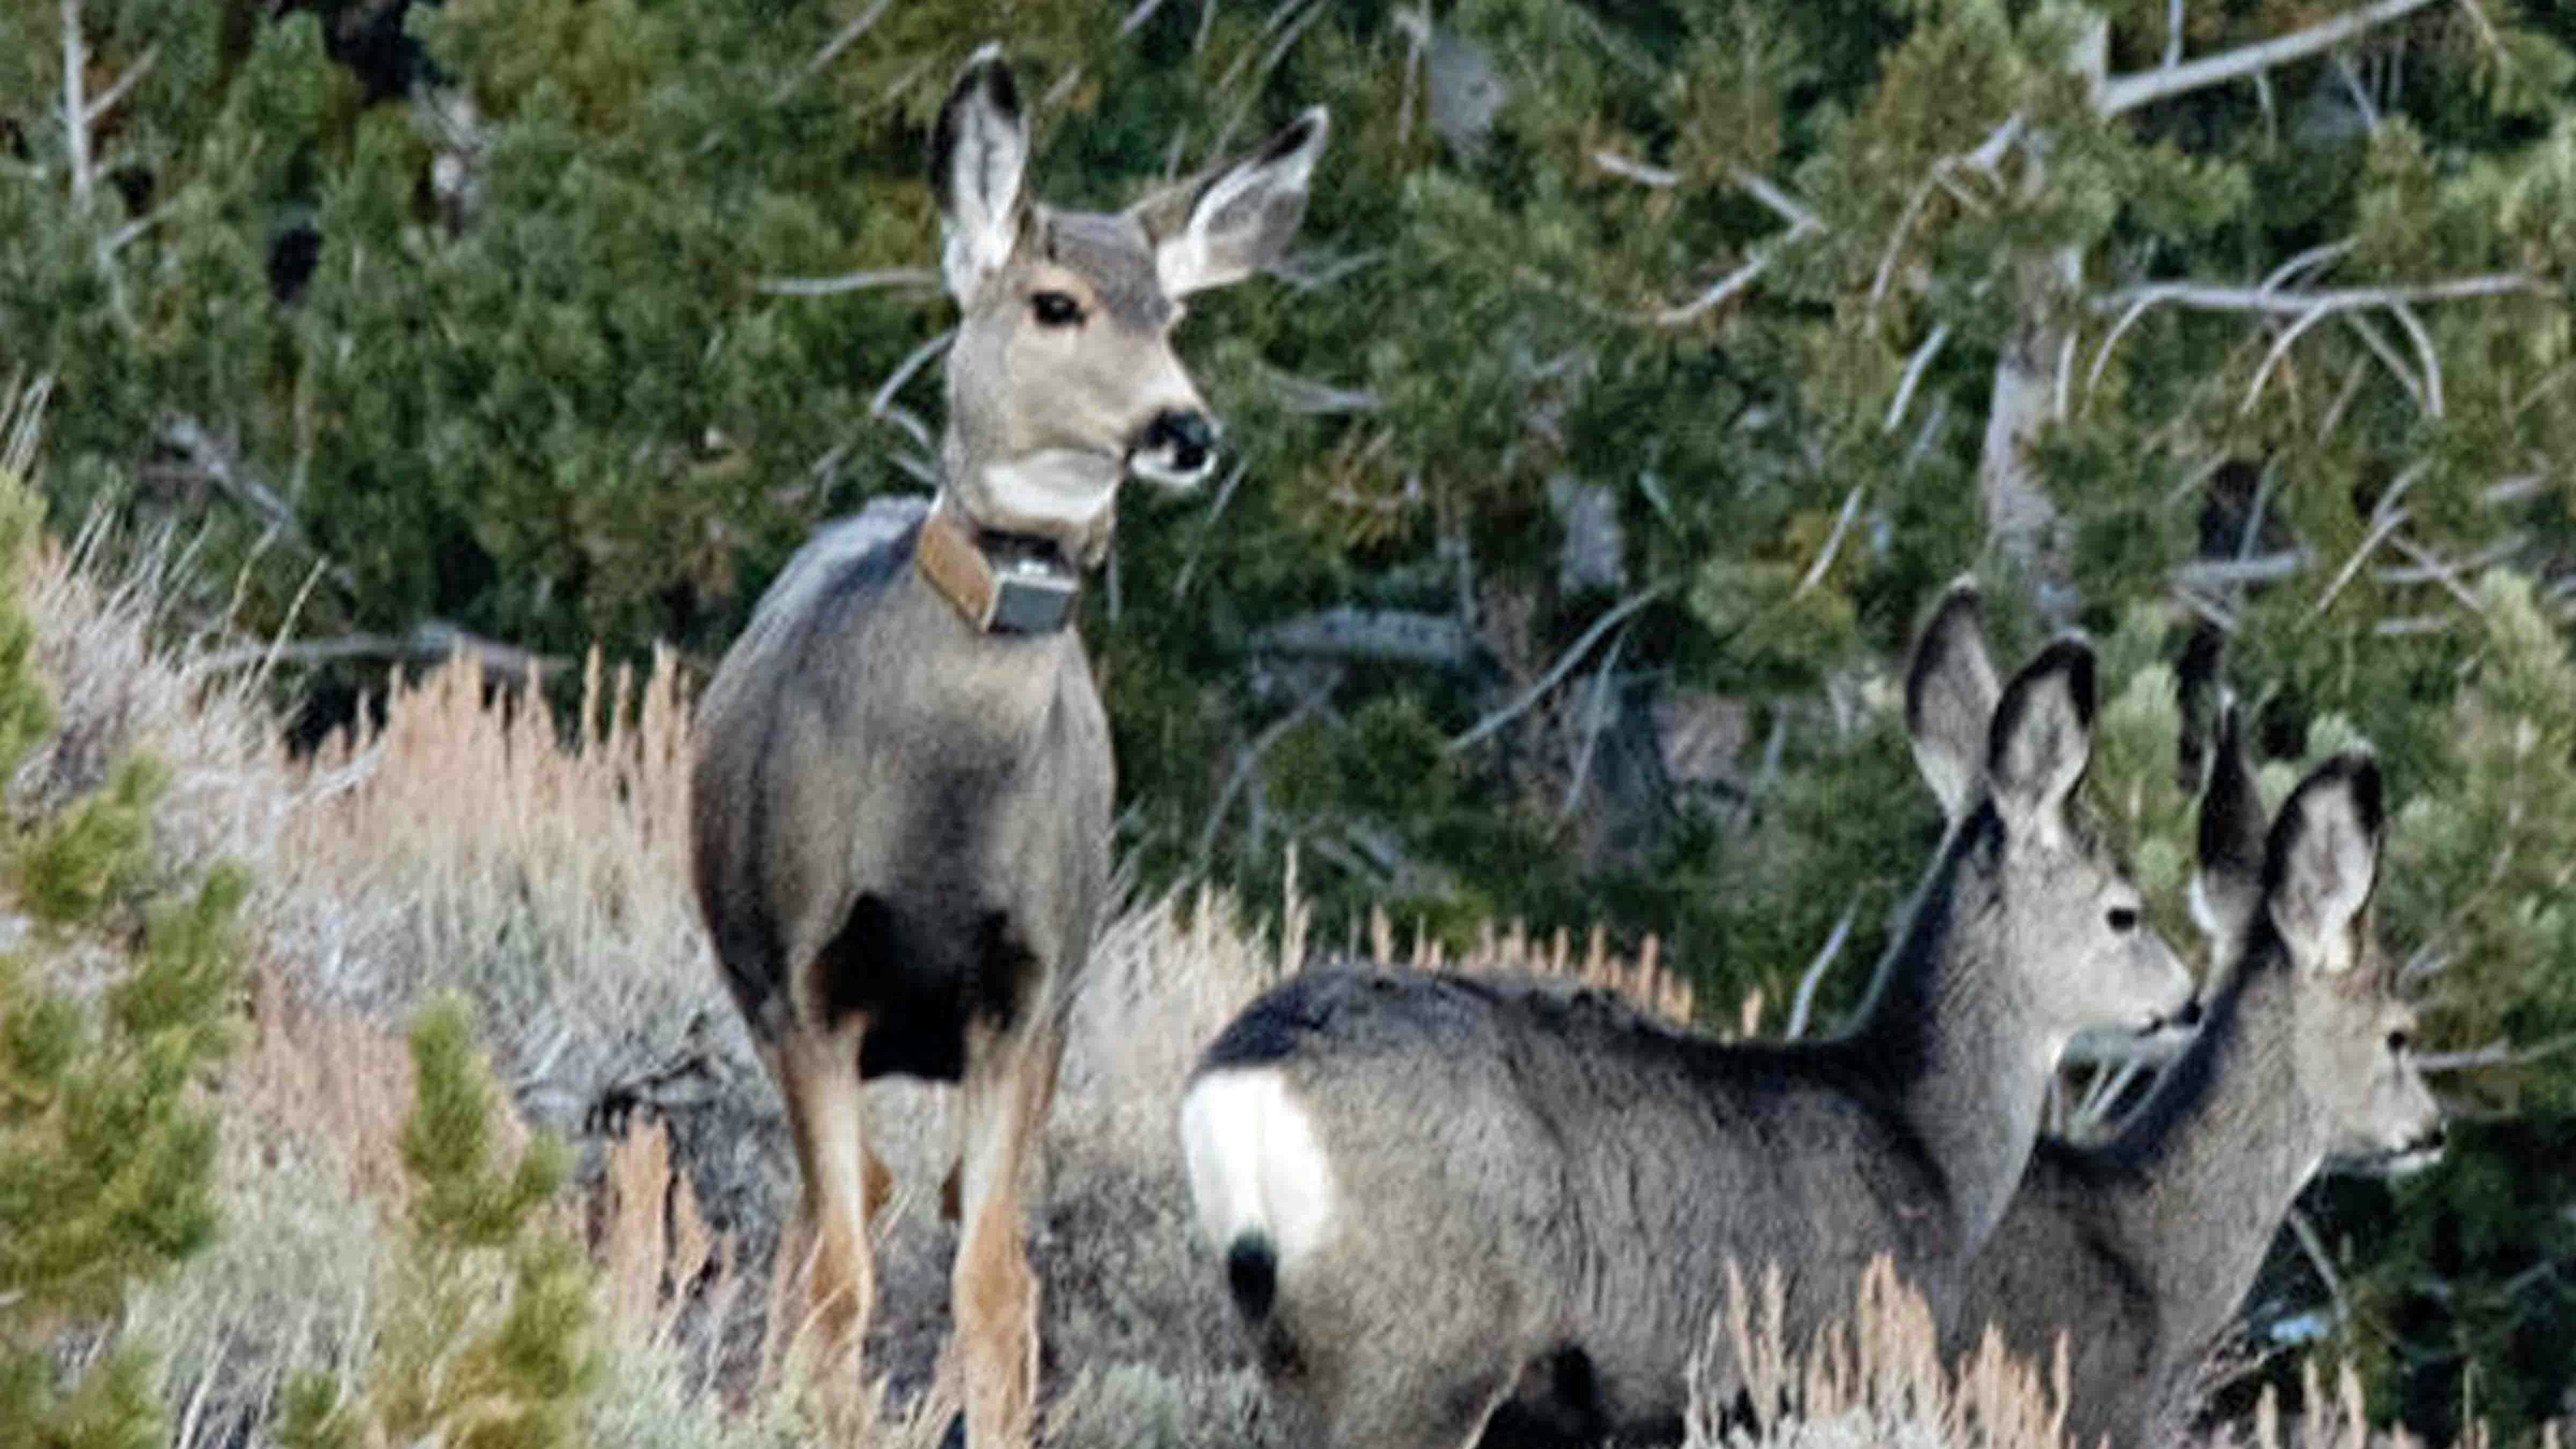 The ultra-long-distance migrating mule deer known as Deer 255 has died. Researchers tracked her across 3,300 miles since 2016. Here, she is shown with her twin fawns in a fall 2020 migration stopover in the Prospect Mountains of Sublette County.